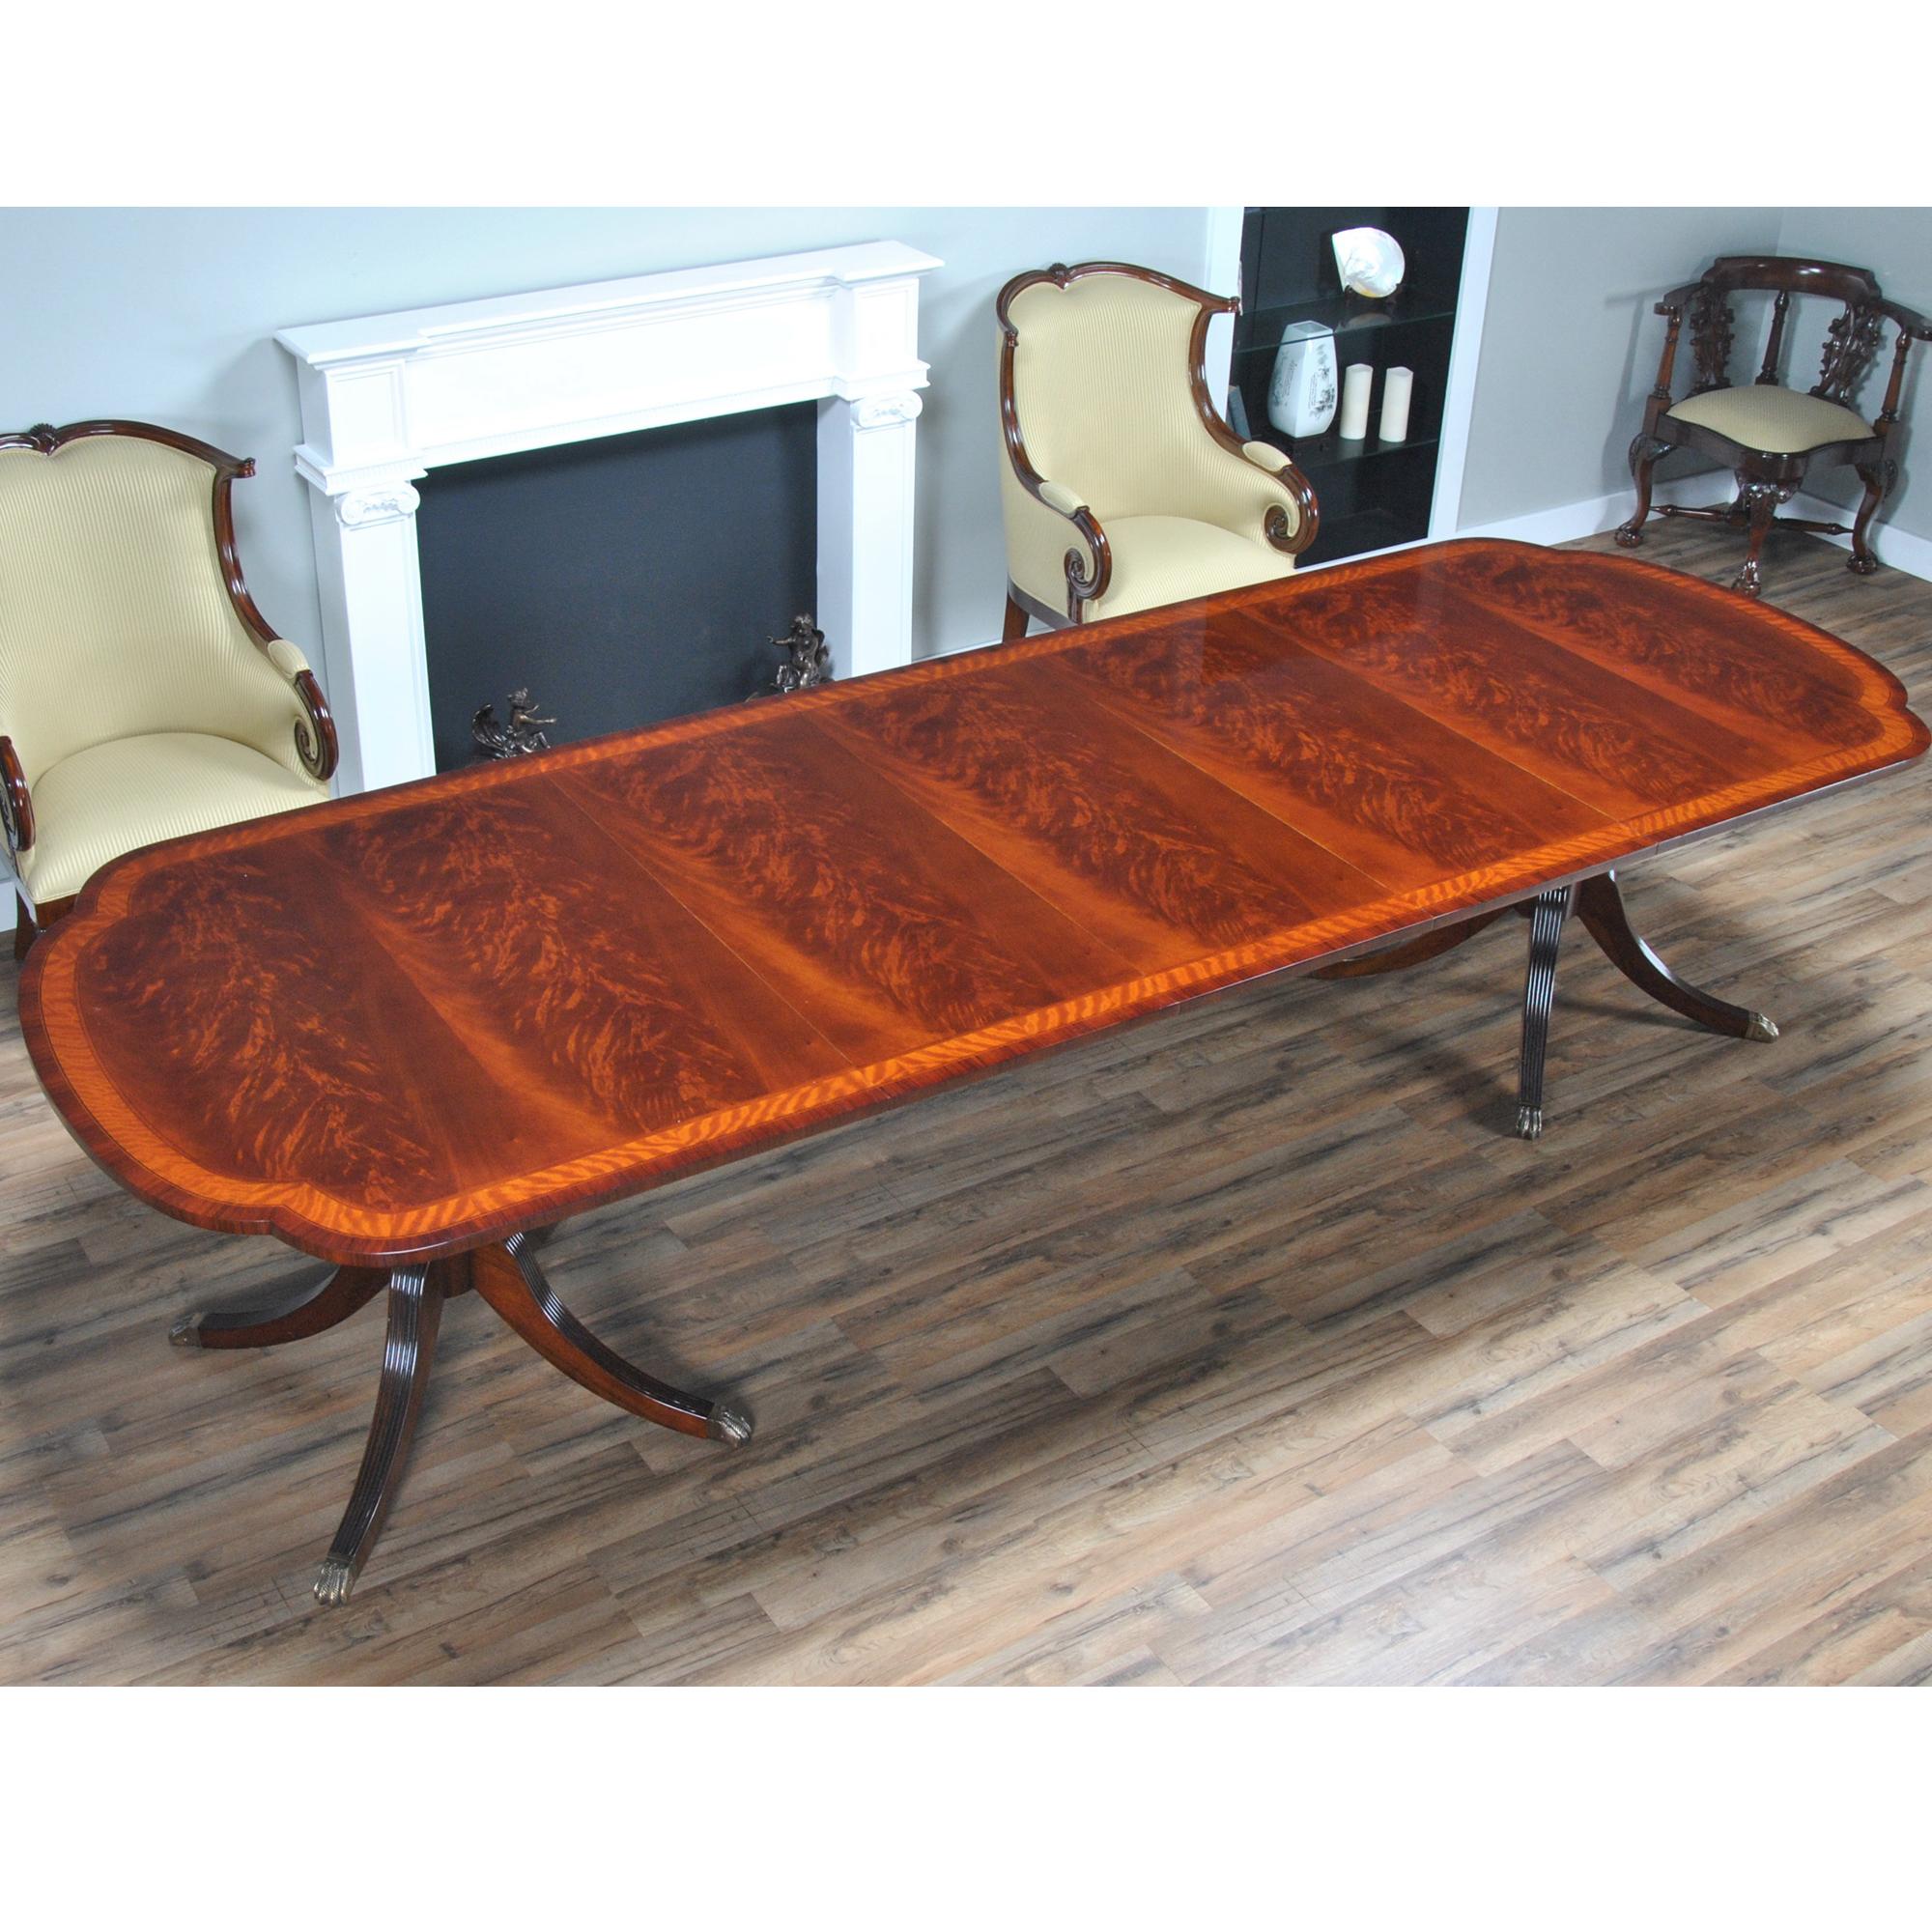 This Scalloped Corner Mahogany Dining Table has a lot of great features that combine to make it a favorite. Shown here with a veneered rosewood edge this table now ships with a reeded solid mahogany edge. A photo of the current edge type can be seen